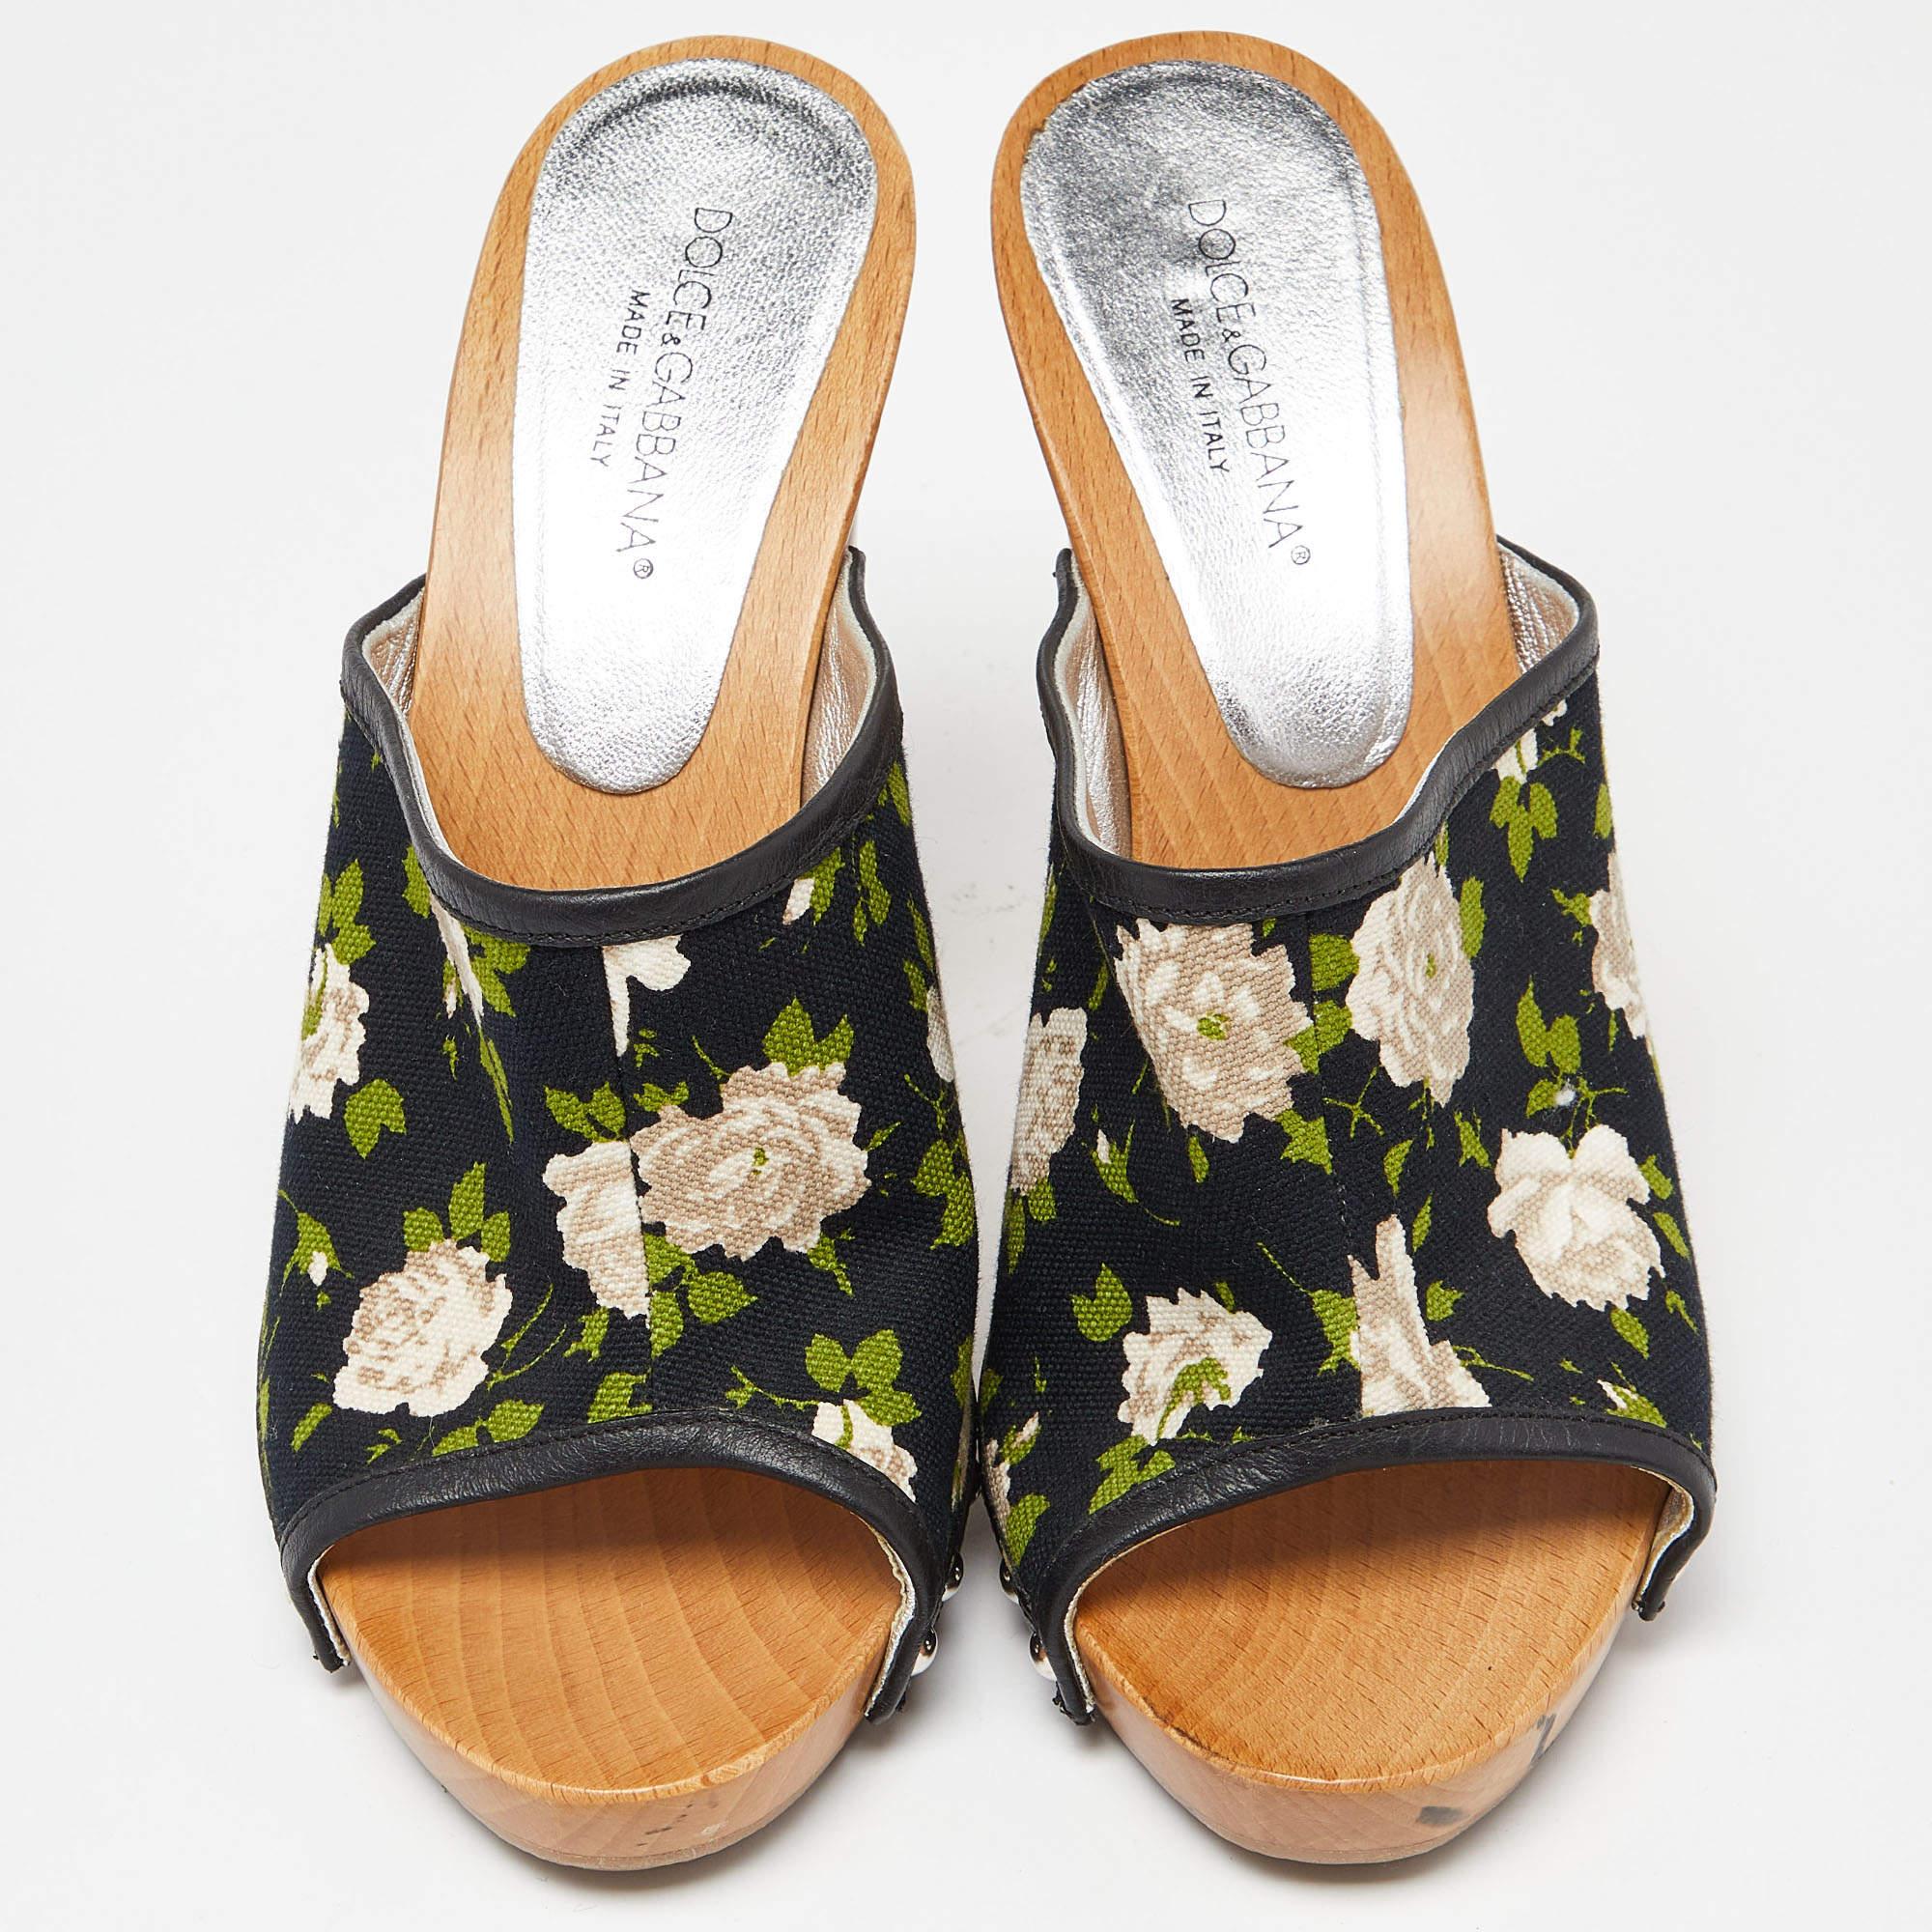 How gorgeous are these block heel mules from Dolce & Gabbana! They've been crafted from floral canvas, displaying beautiful colors. Wear the artistic mules with a jacket and skinny jeans.

